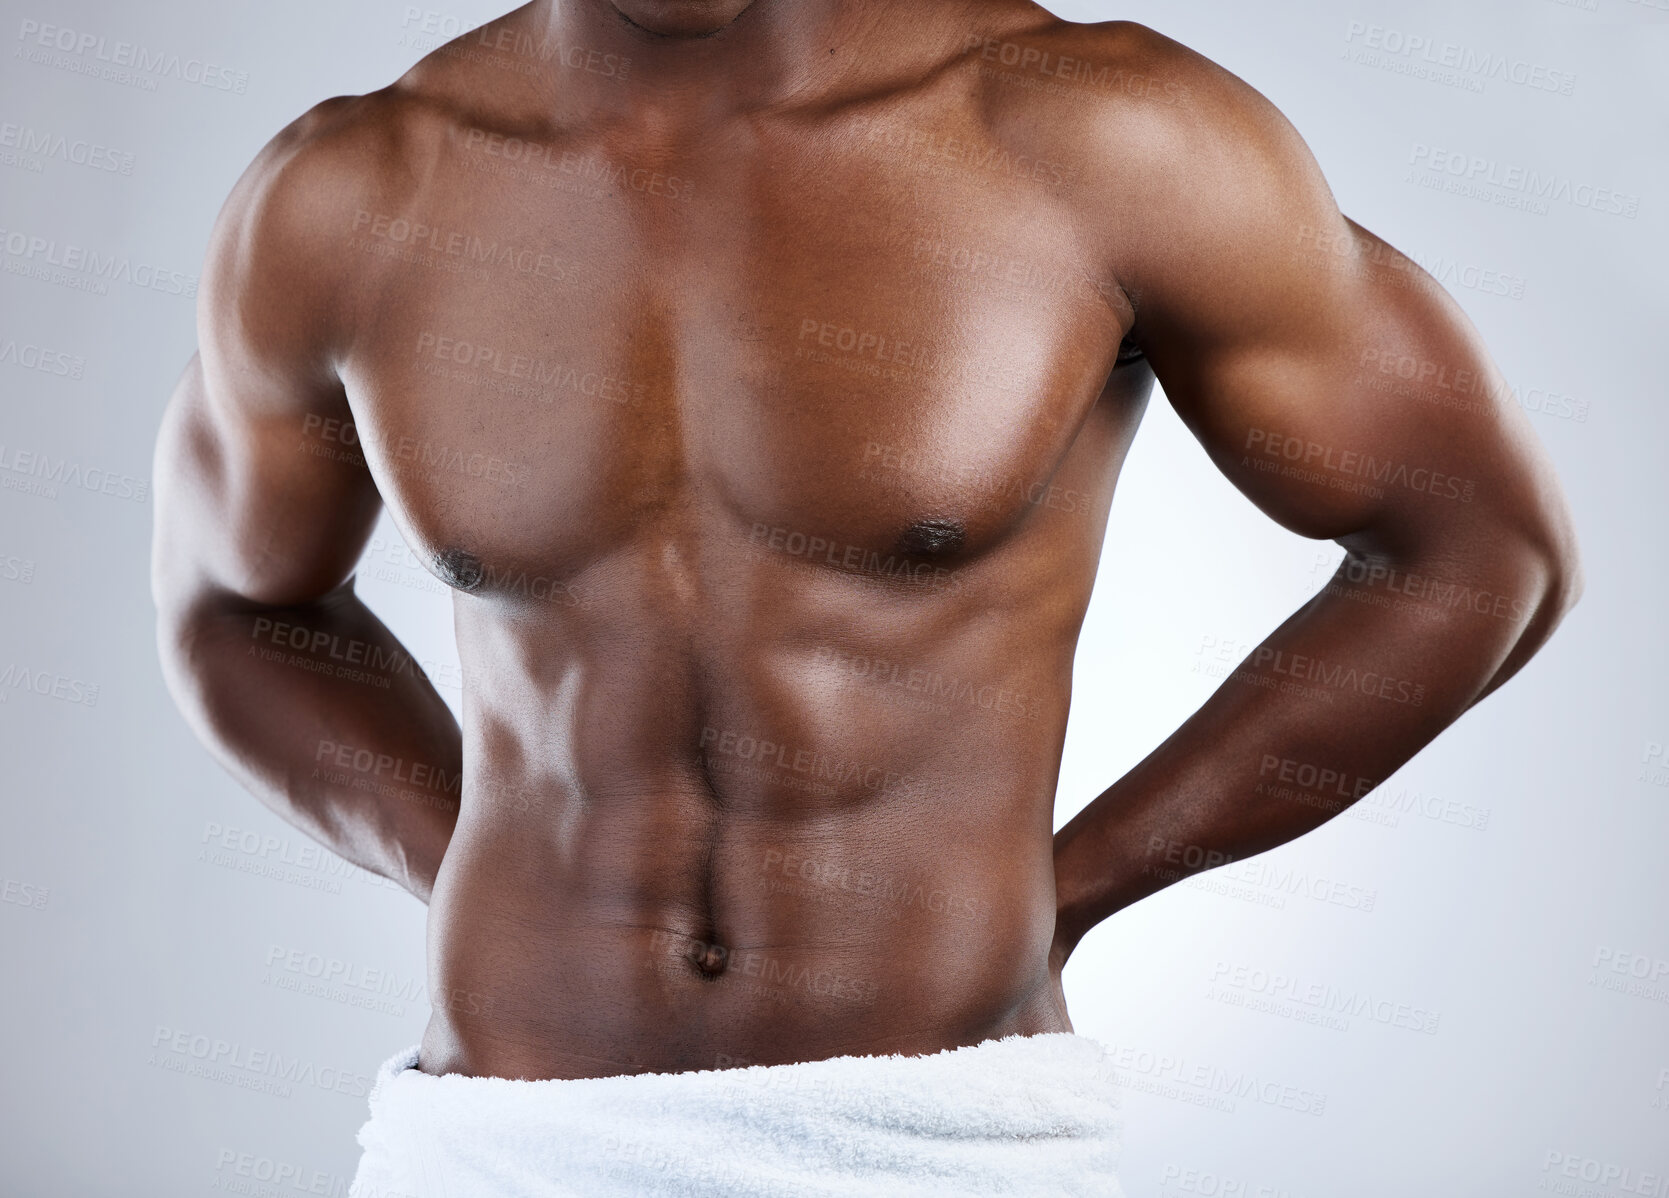 Buy stock photo Studio shot of an unrecognizable musclar man in a towel against a grey background